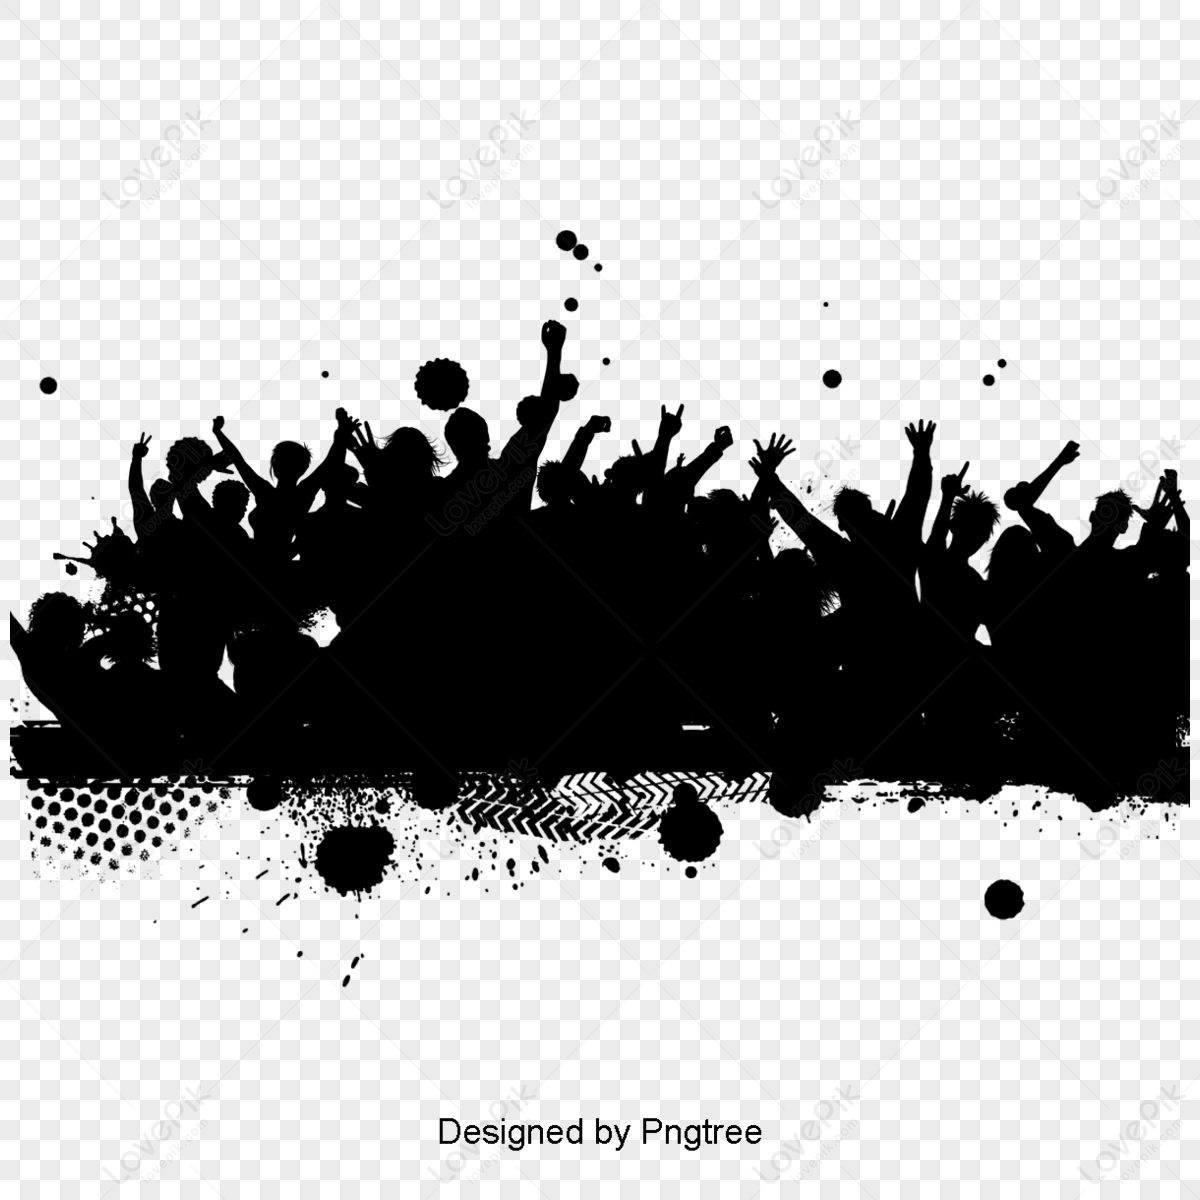 Party Crowd Background PNG Images With Transparent Background | Free ...